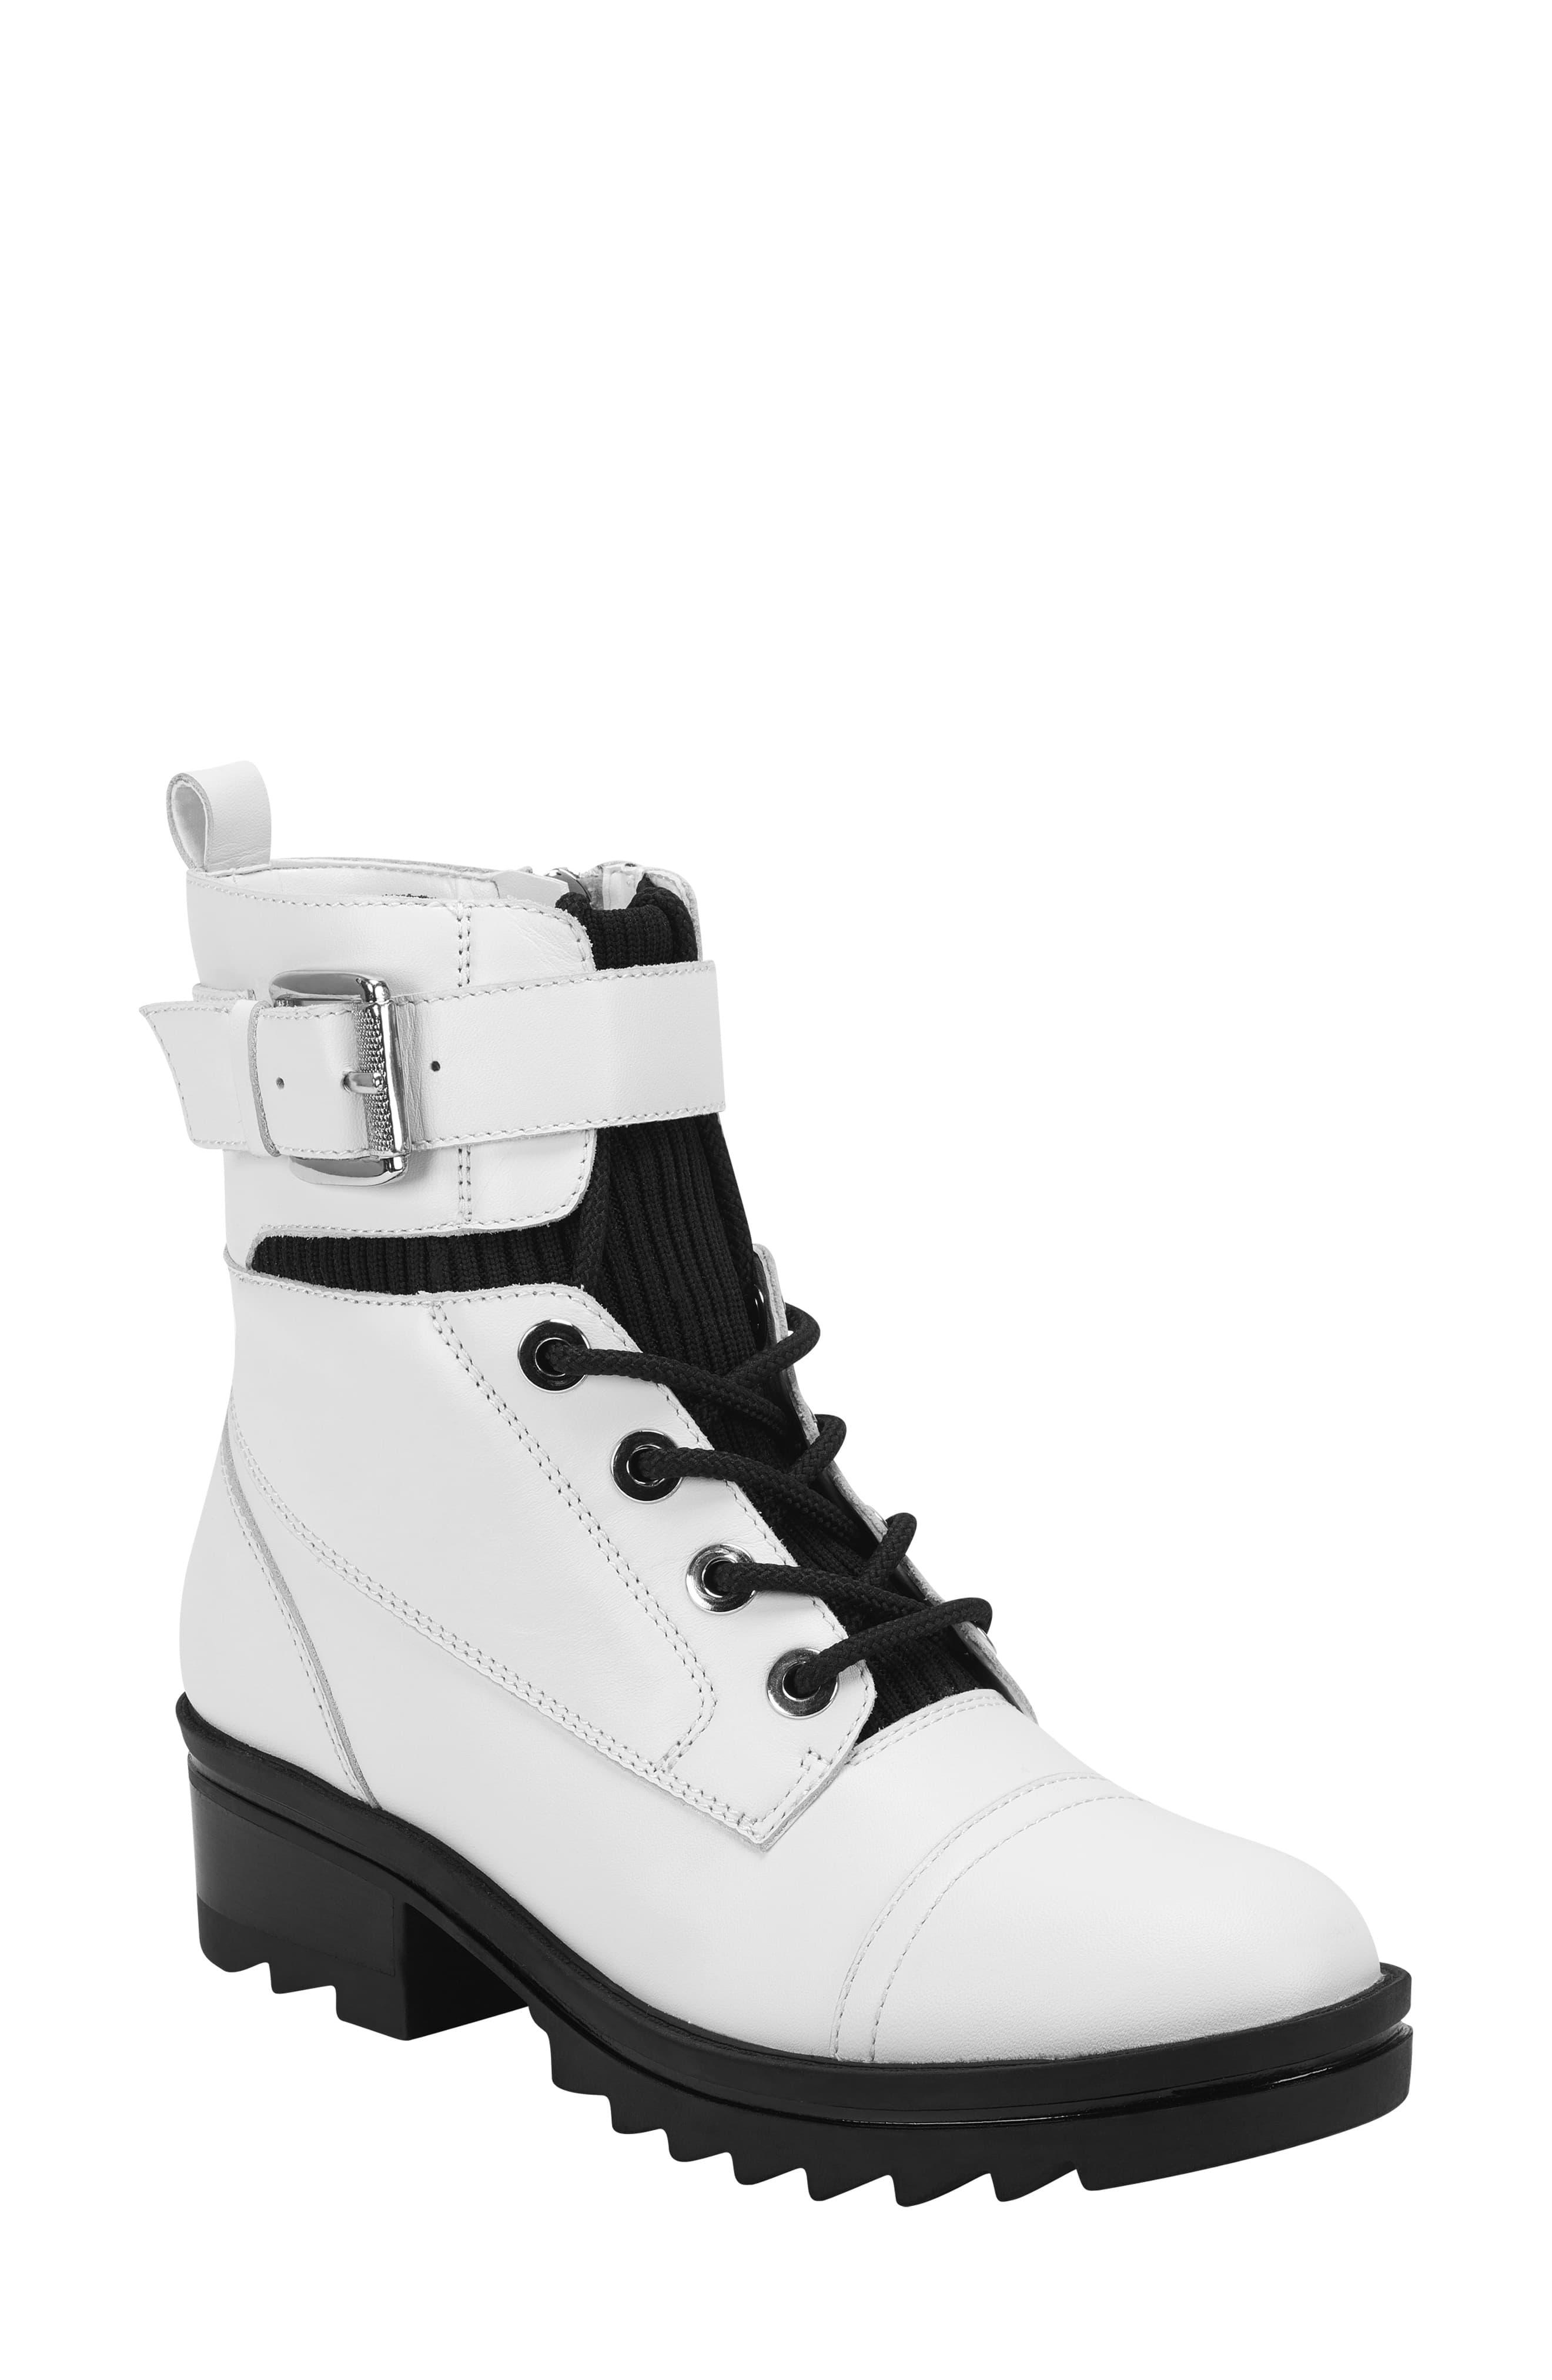 Marc Fisher Bristyn Combat Boot in Ivory Leather (White) - Save 43% - Lyst